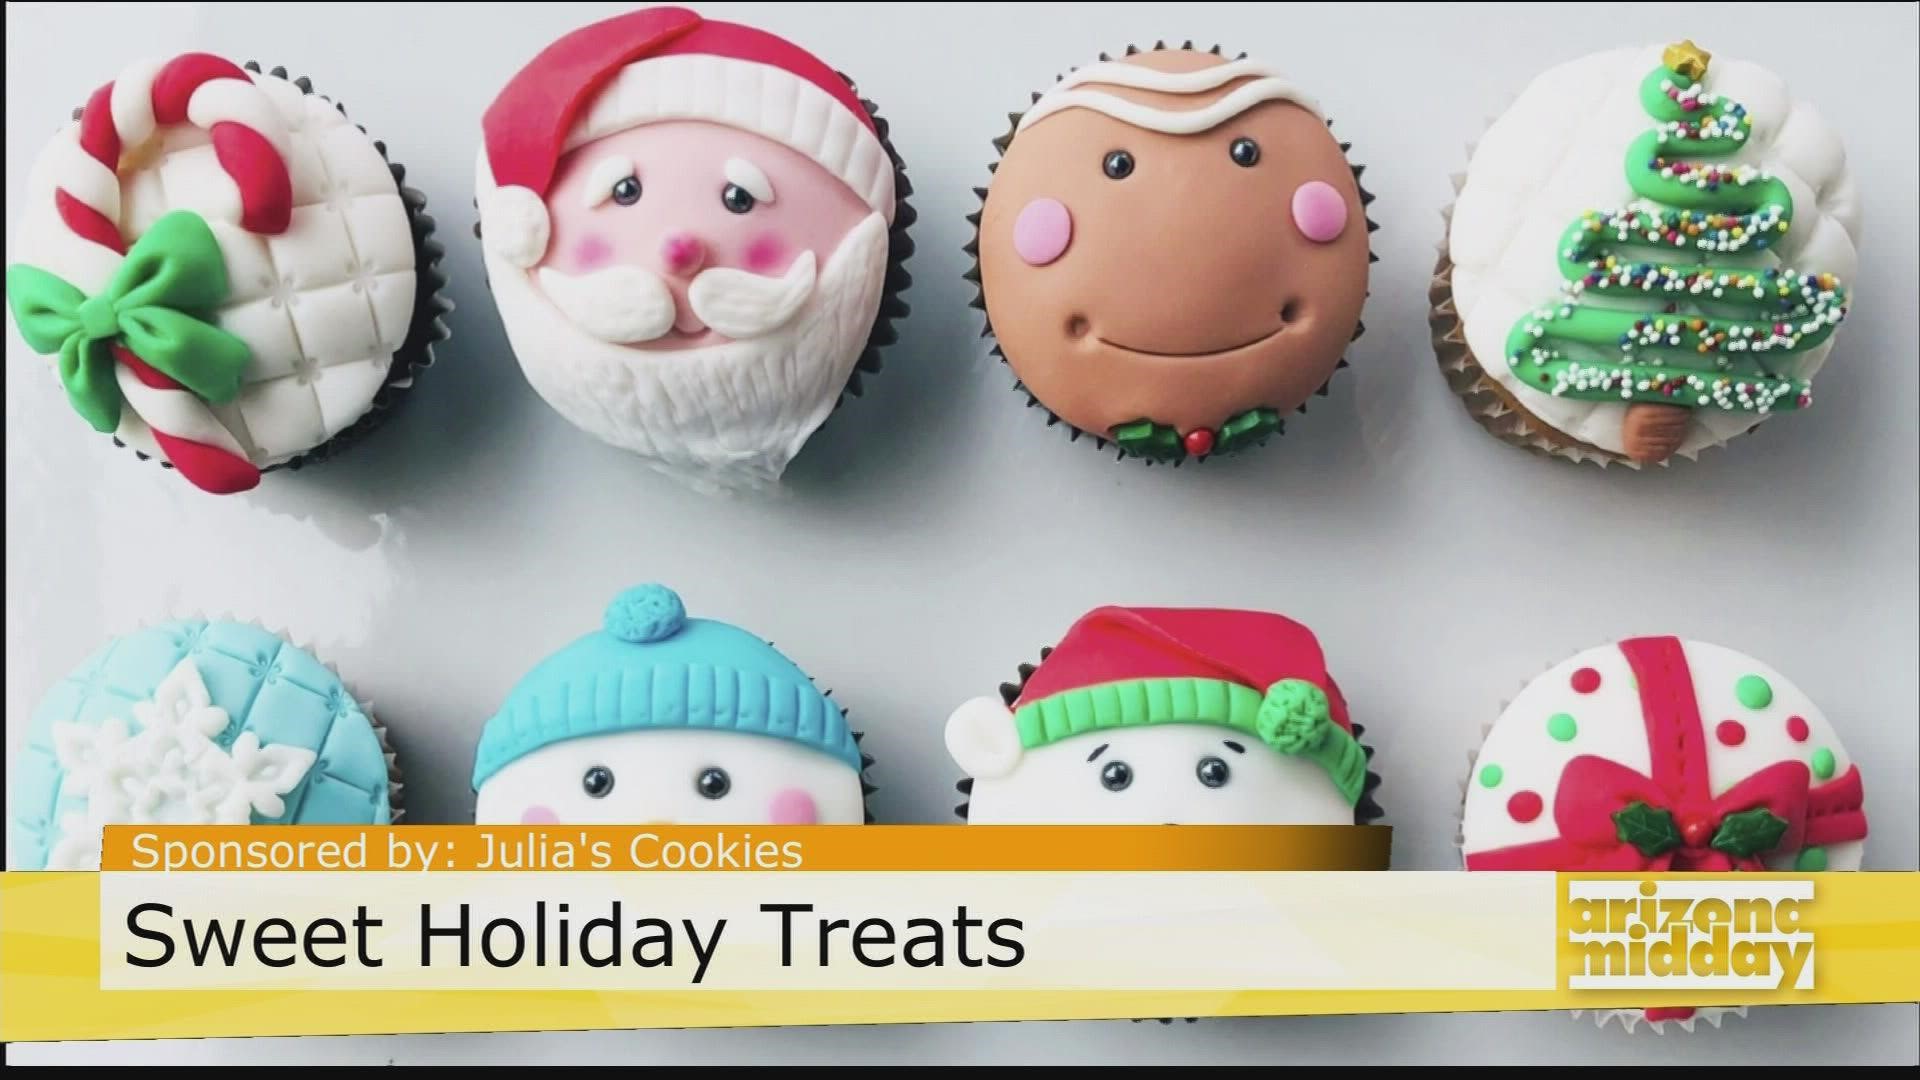 Cookie decorator Julia Perugini shows us just how easy it its to get decorate holiday cookies - so easy even your kids can help!